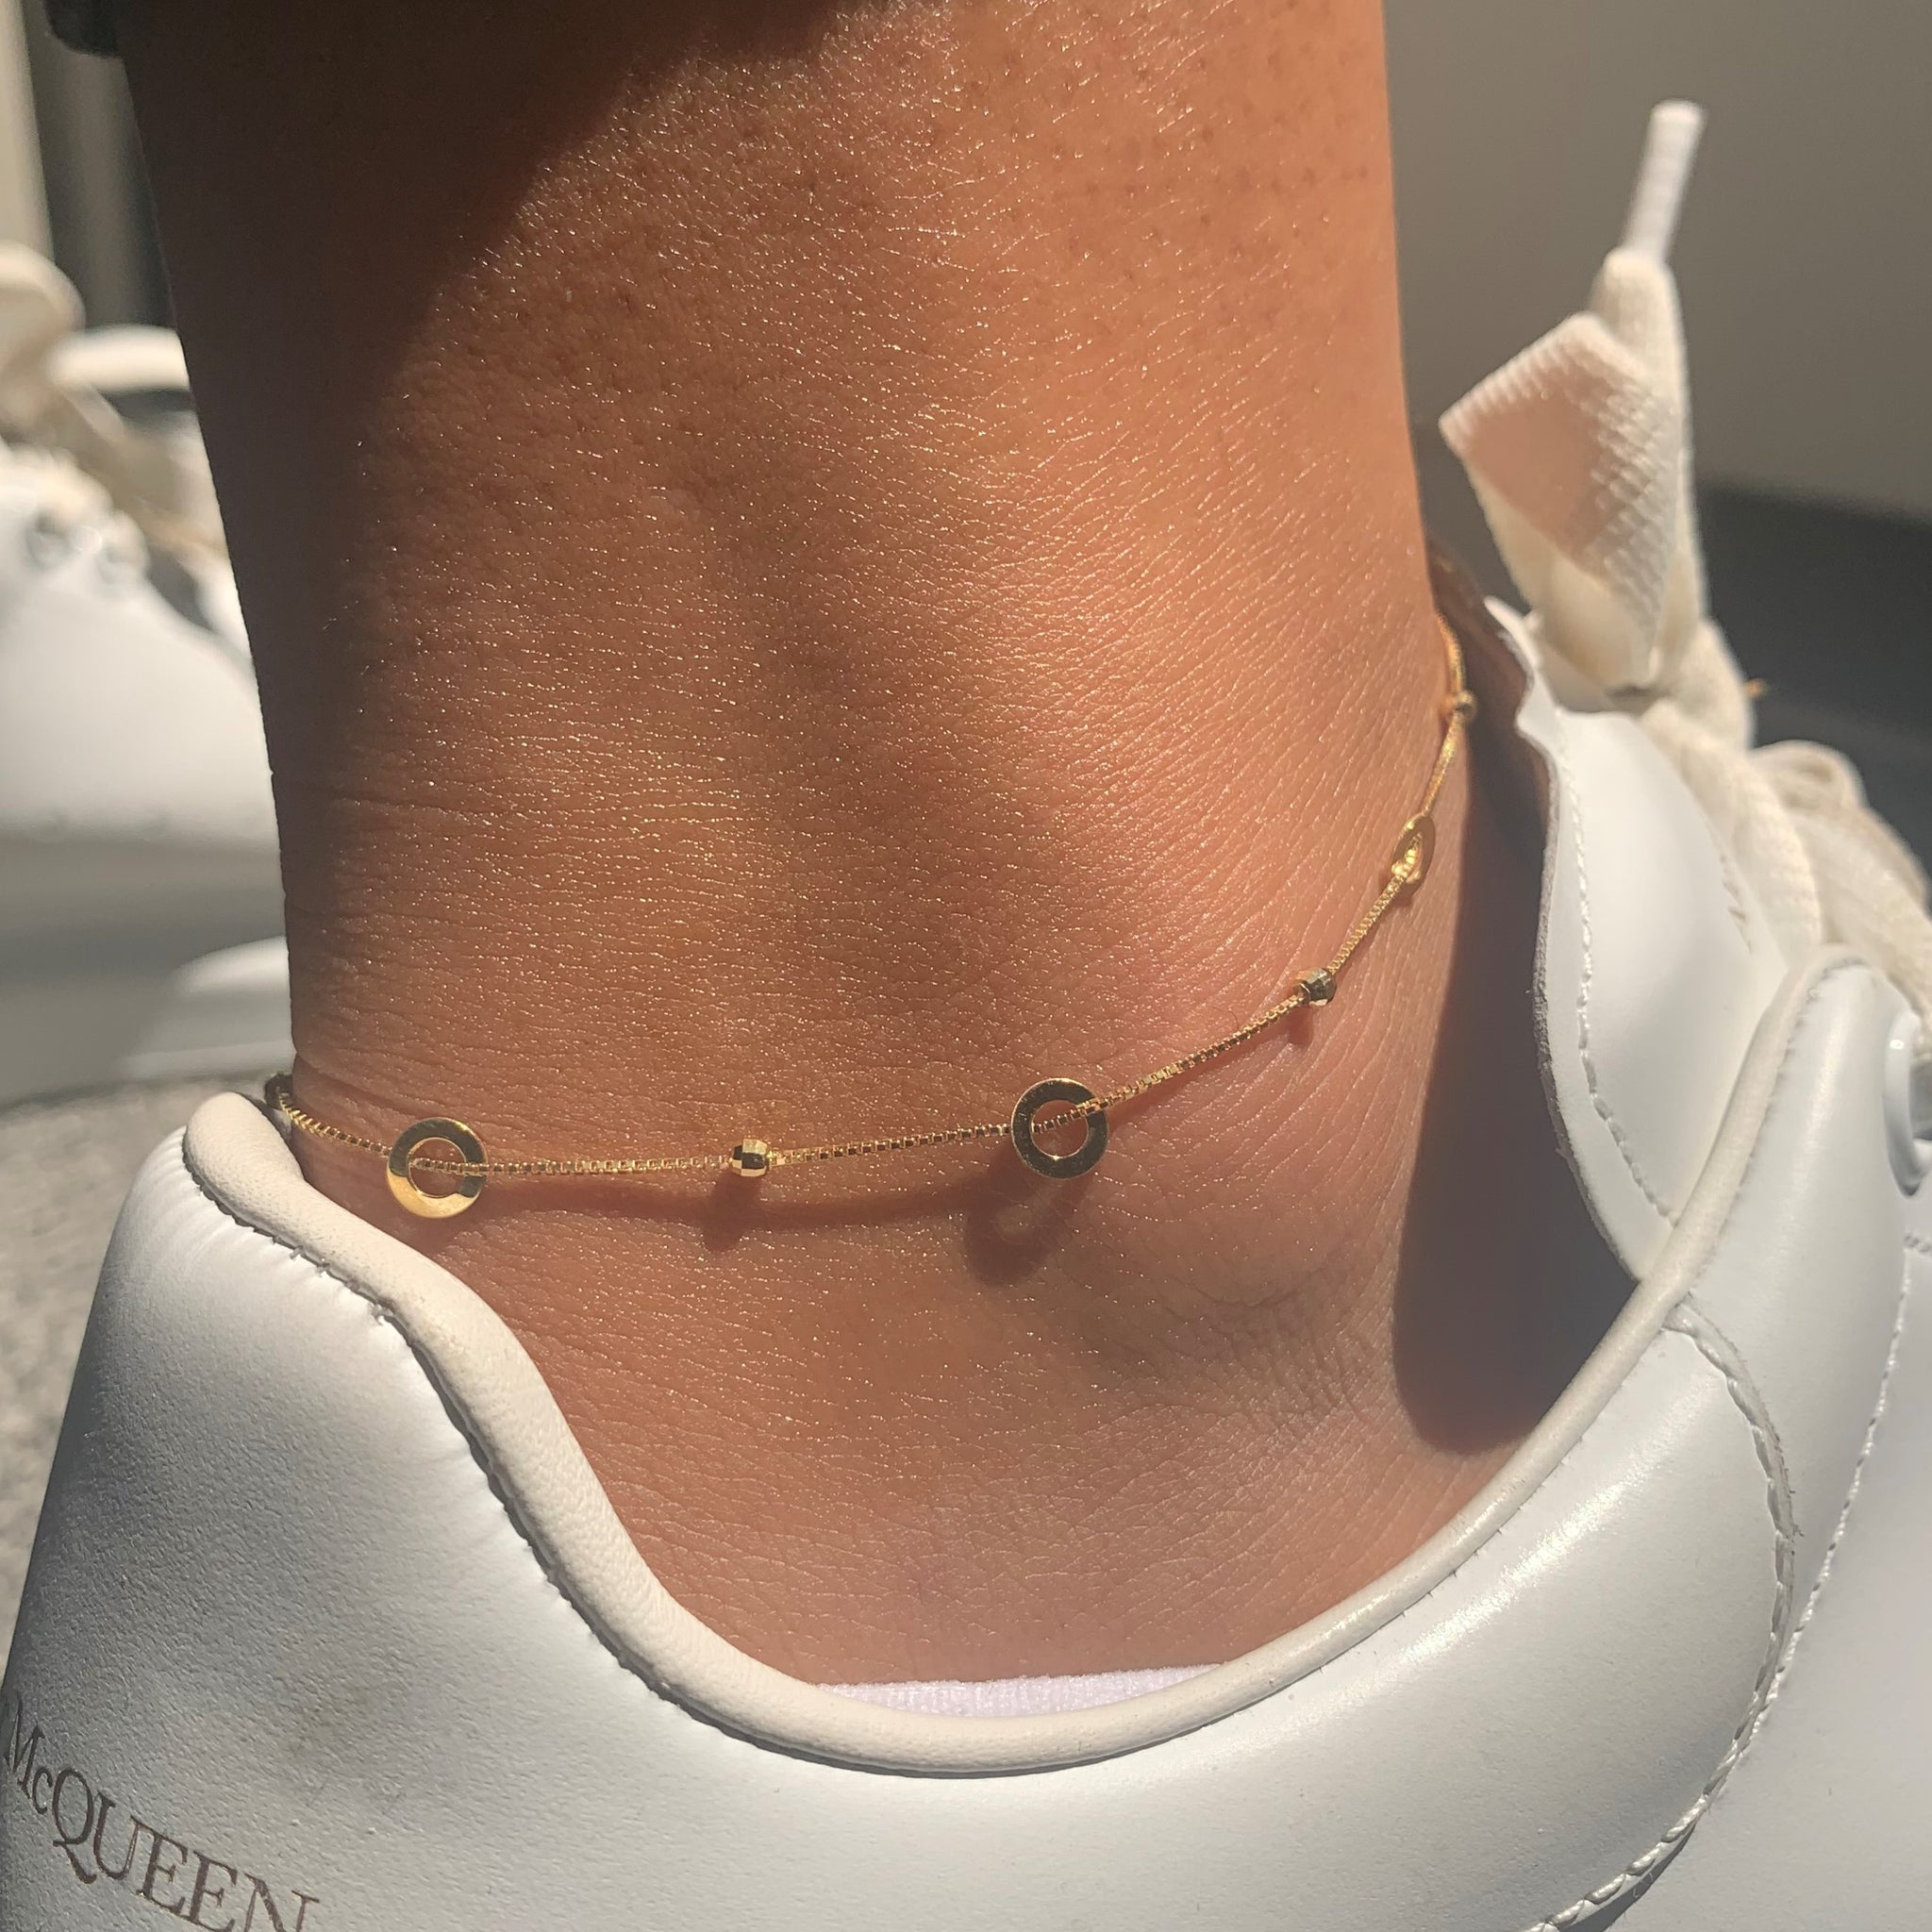 Buy Curb Chain Anklet, Layered Silver Anklet, 14k Gold Double Chain Anklet, Gold  Ankle Bracelet, Anklets for Women, Gift for Her Online in India - Etsy